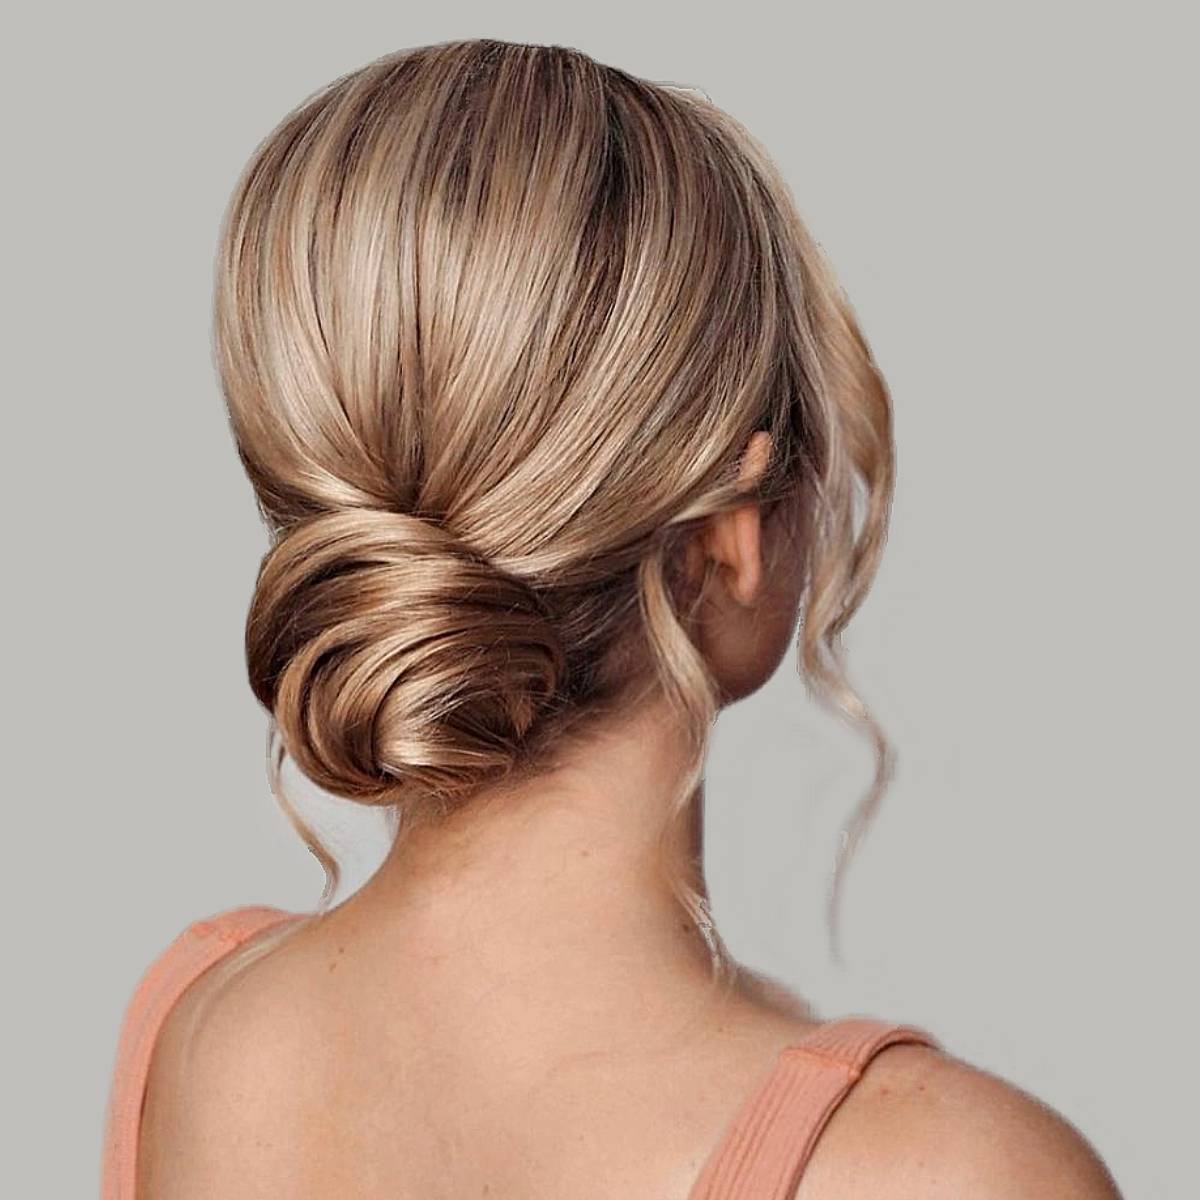 3 fast and easy everyday hairstyles - Hair Romance